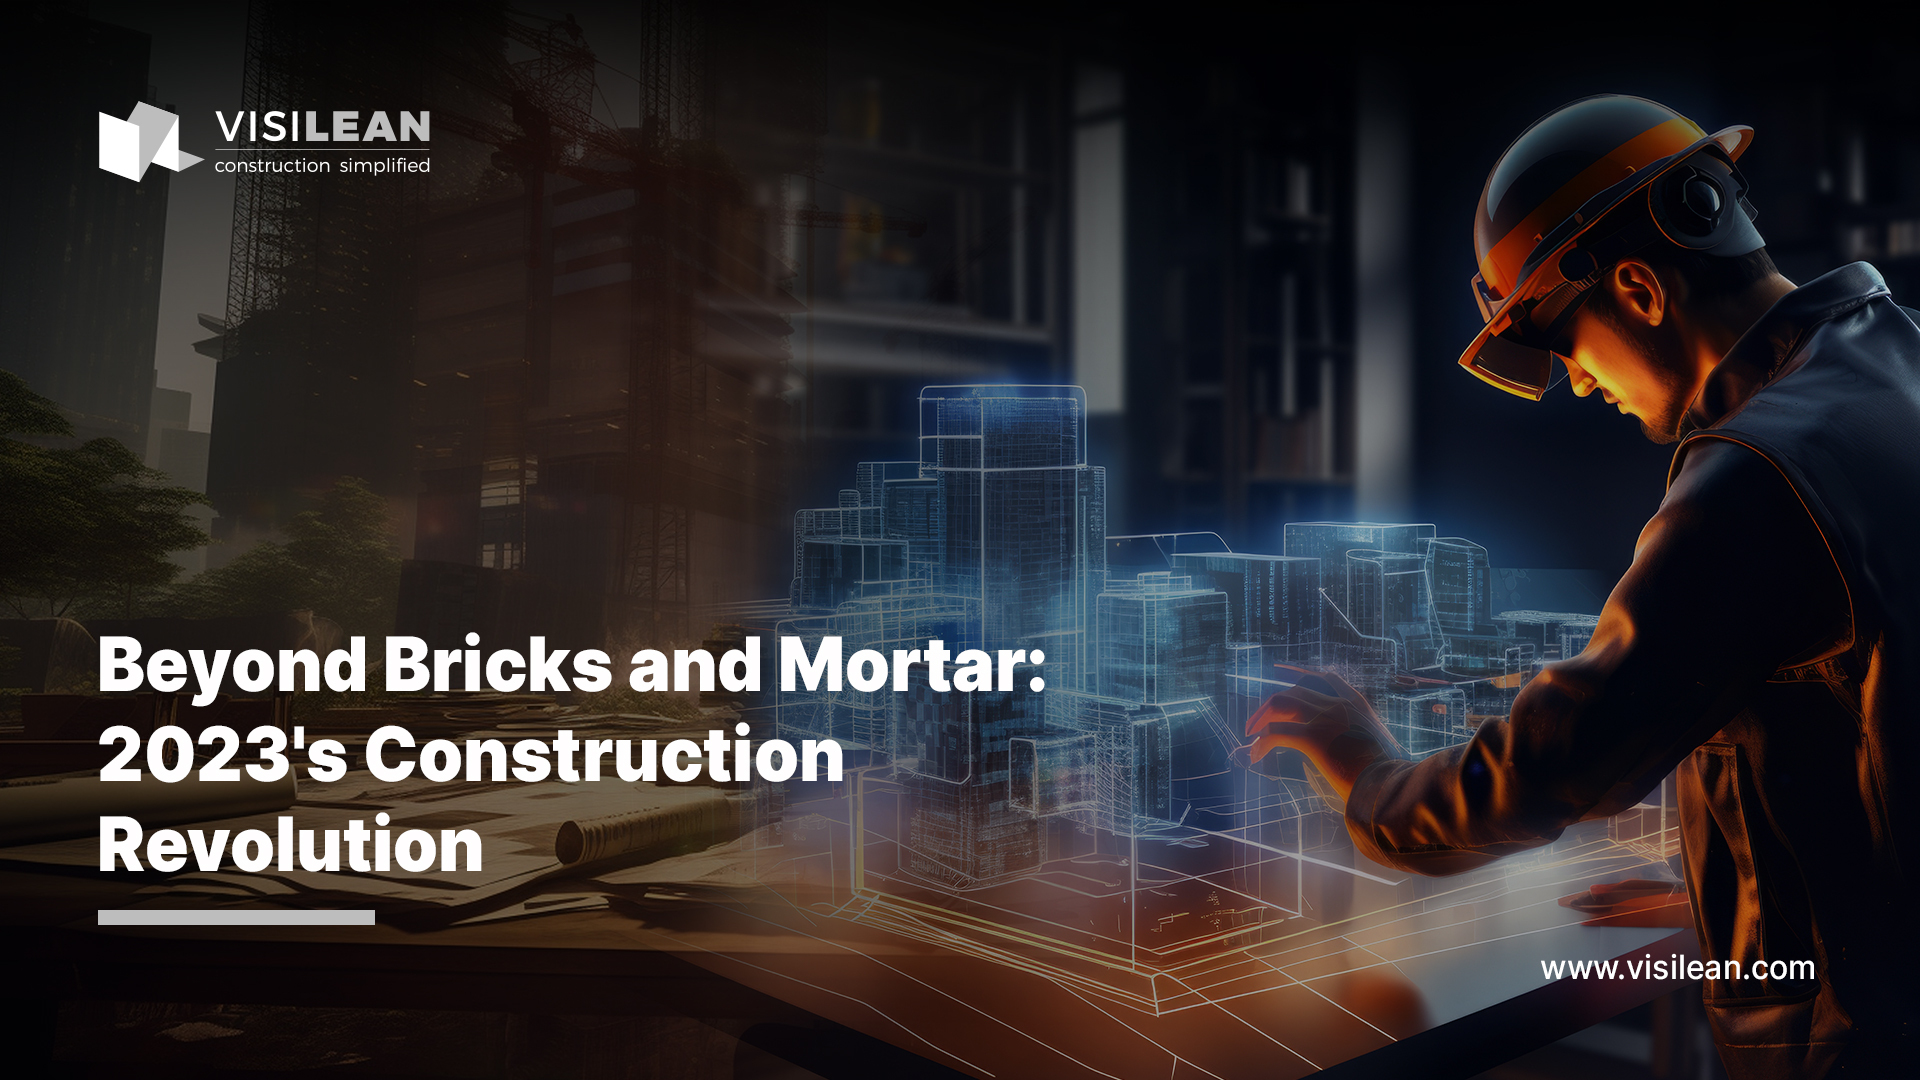 Explore the construction revolution of 2023, from sustainability to workforce challenges, and how VisiLean's solutions drive innovation.